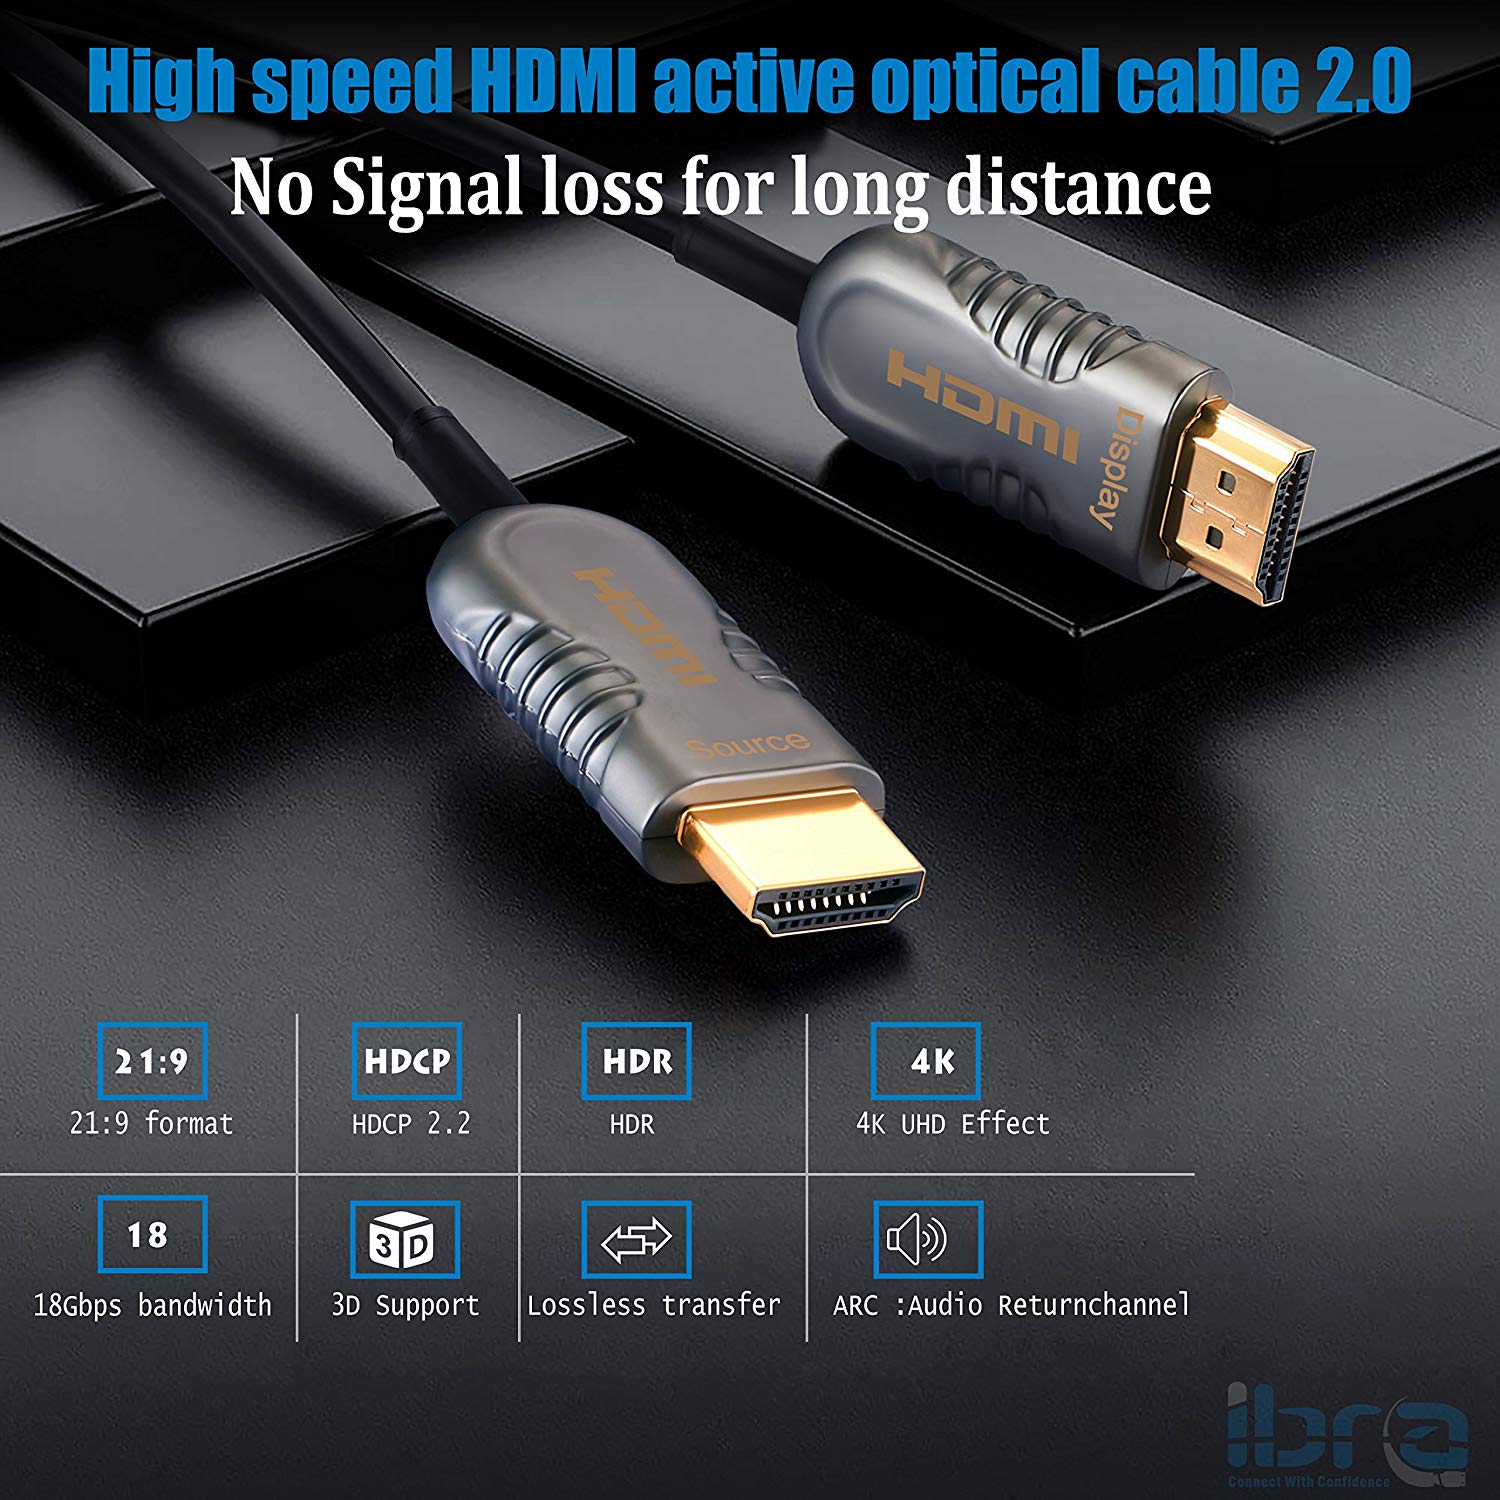 15M Fiber Optic HDMI High Speed Cable v2.0 18Gbps HDMI Lead Support 4K@60Hz/4:4:4/3D/4K HDR HDCP 2.2 for Apple TV, HDTV, Roku TV Box, Xbox One X, Home Theater, PS4, PS3 etc - IBRA OPTICAL HDMI Cable